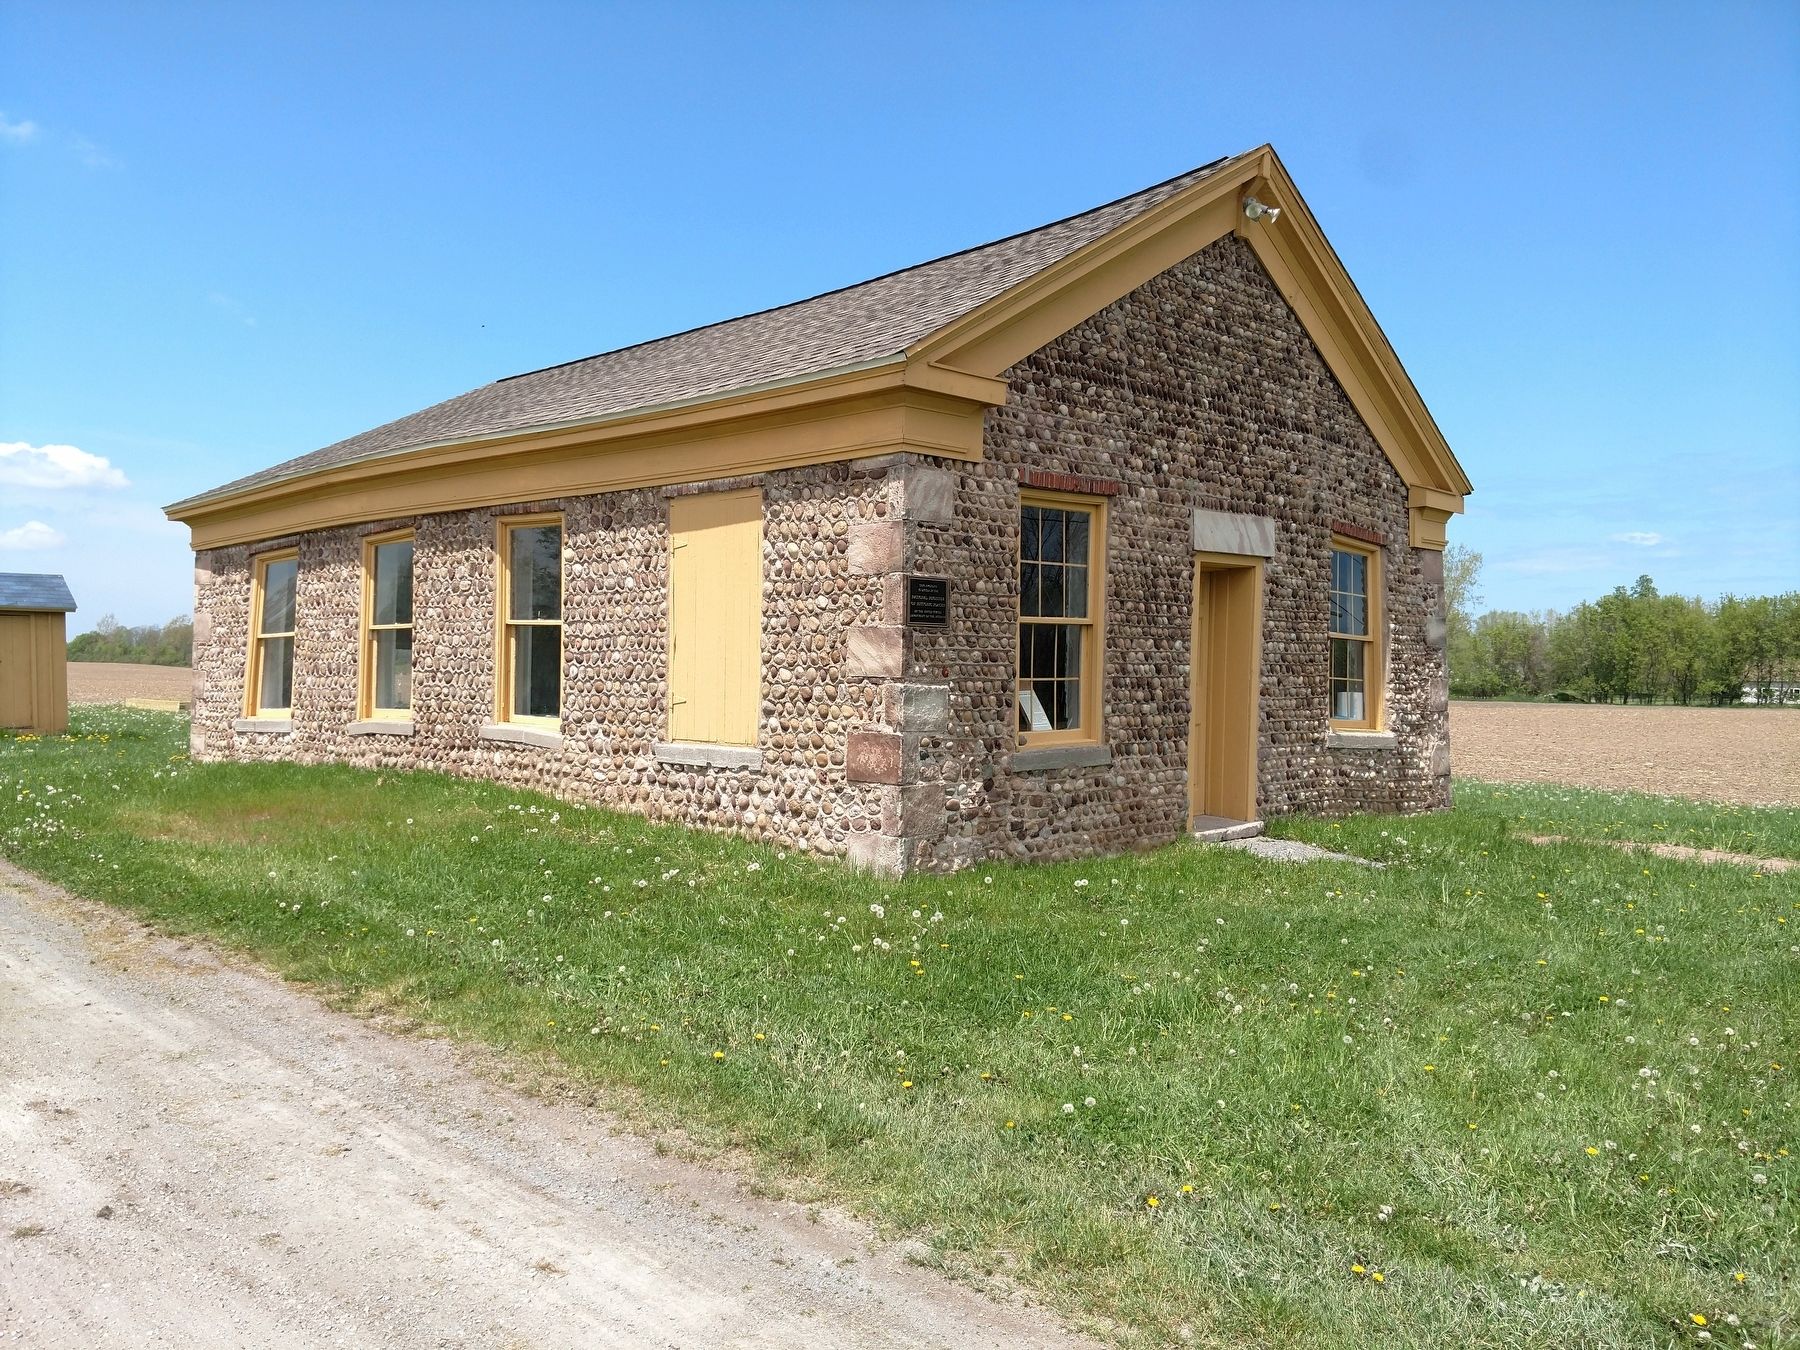 Gaines Basin Schoolhouse image. Click for full size.